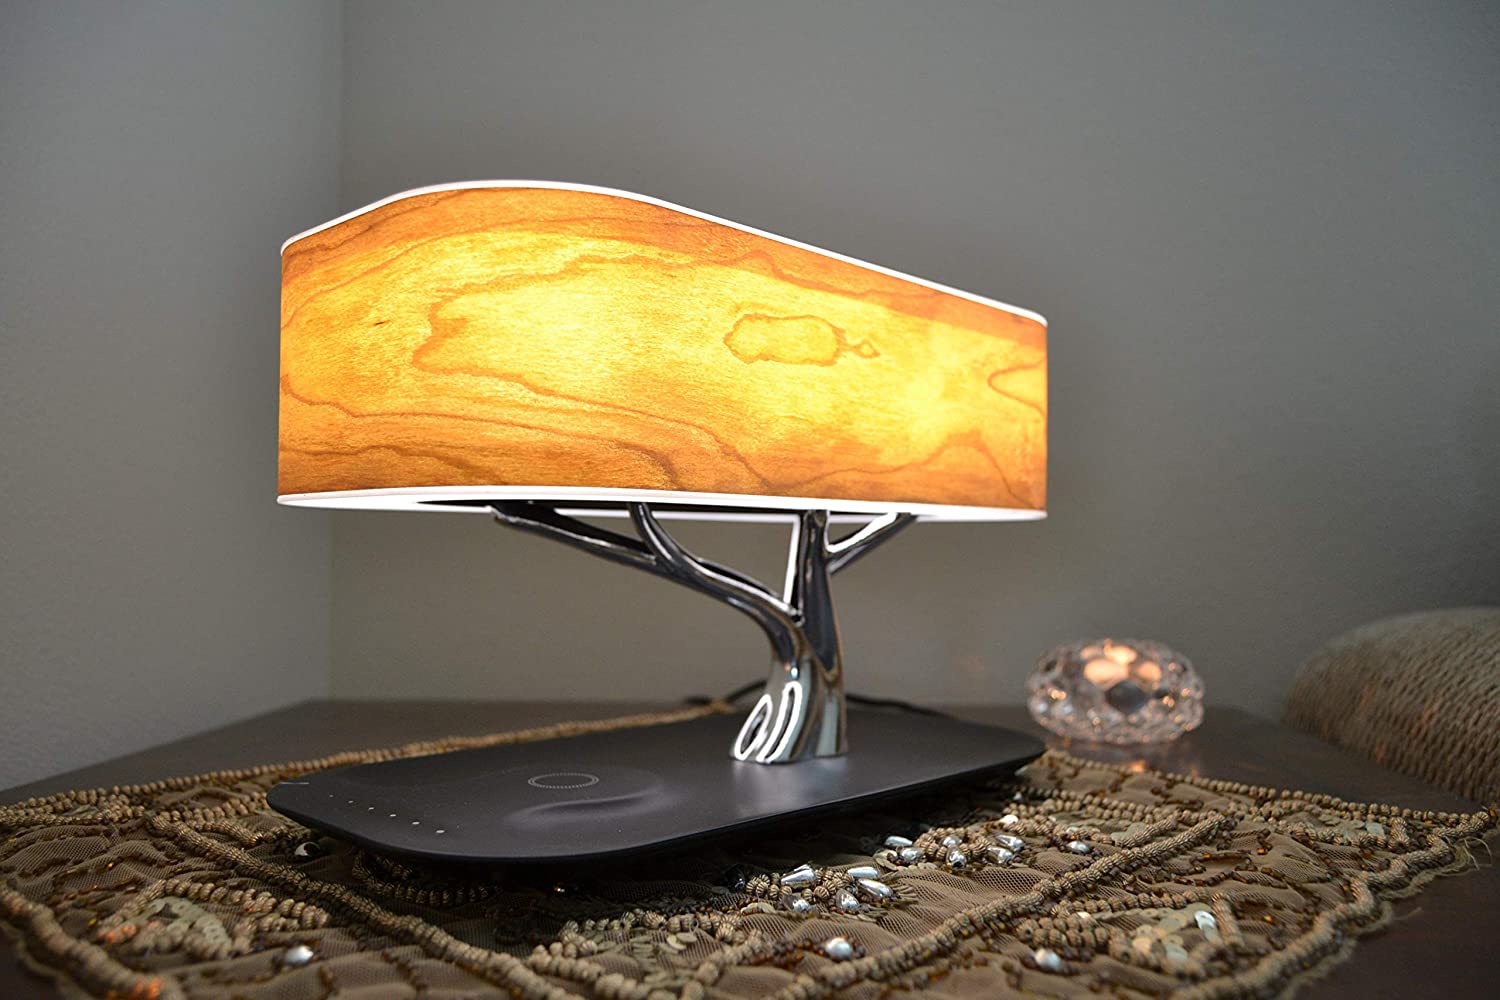 lamp with bluetooth-speaker